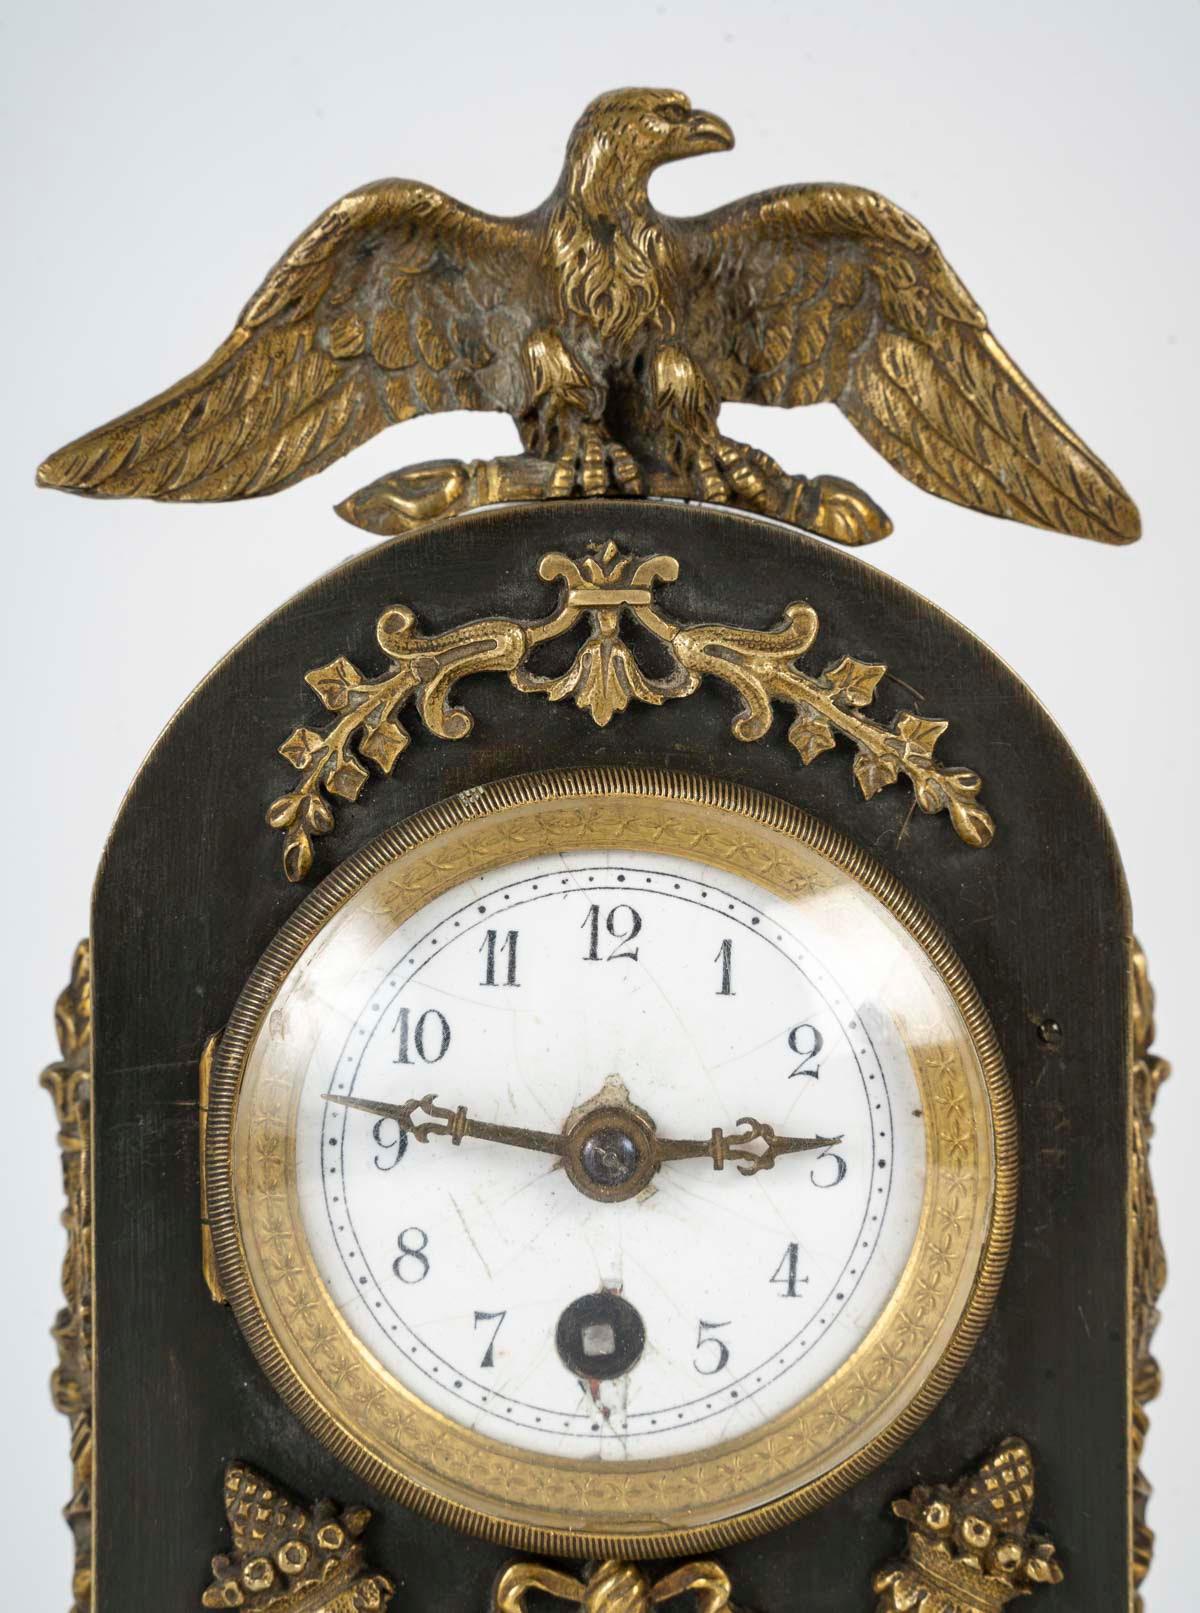 Empire style bronze travel clock, late 19th century or early 20th century.

Empire style bronze travel clock with double patina, late 19th or early 20th century, (movement to be revised).
H: 22cm, W: 12cm, D: 8cm